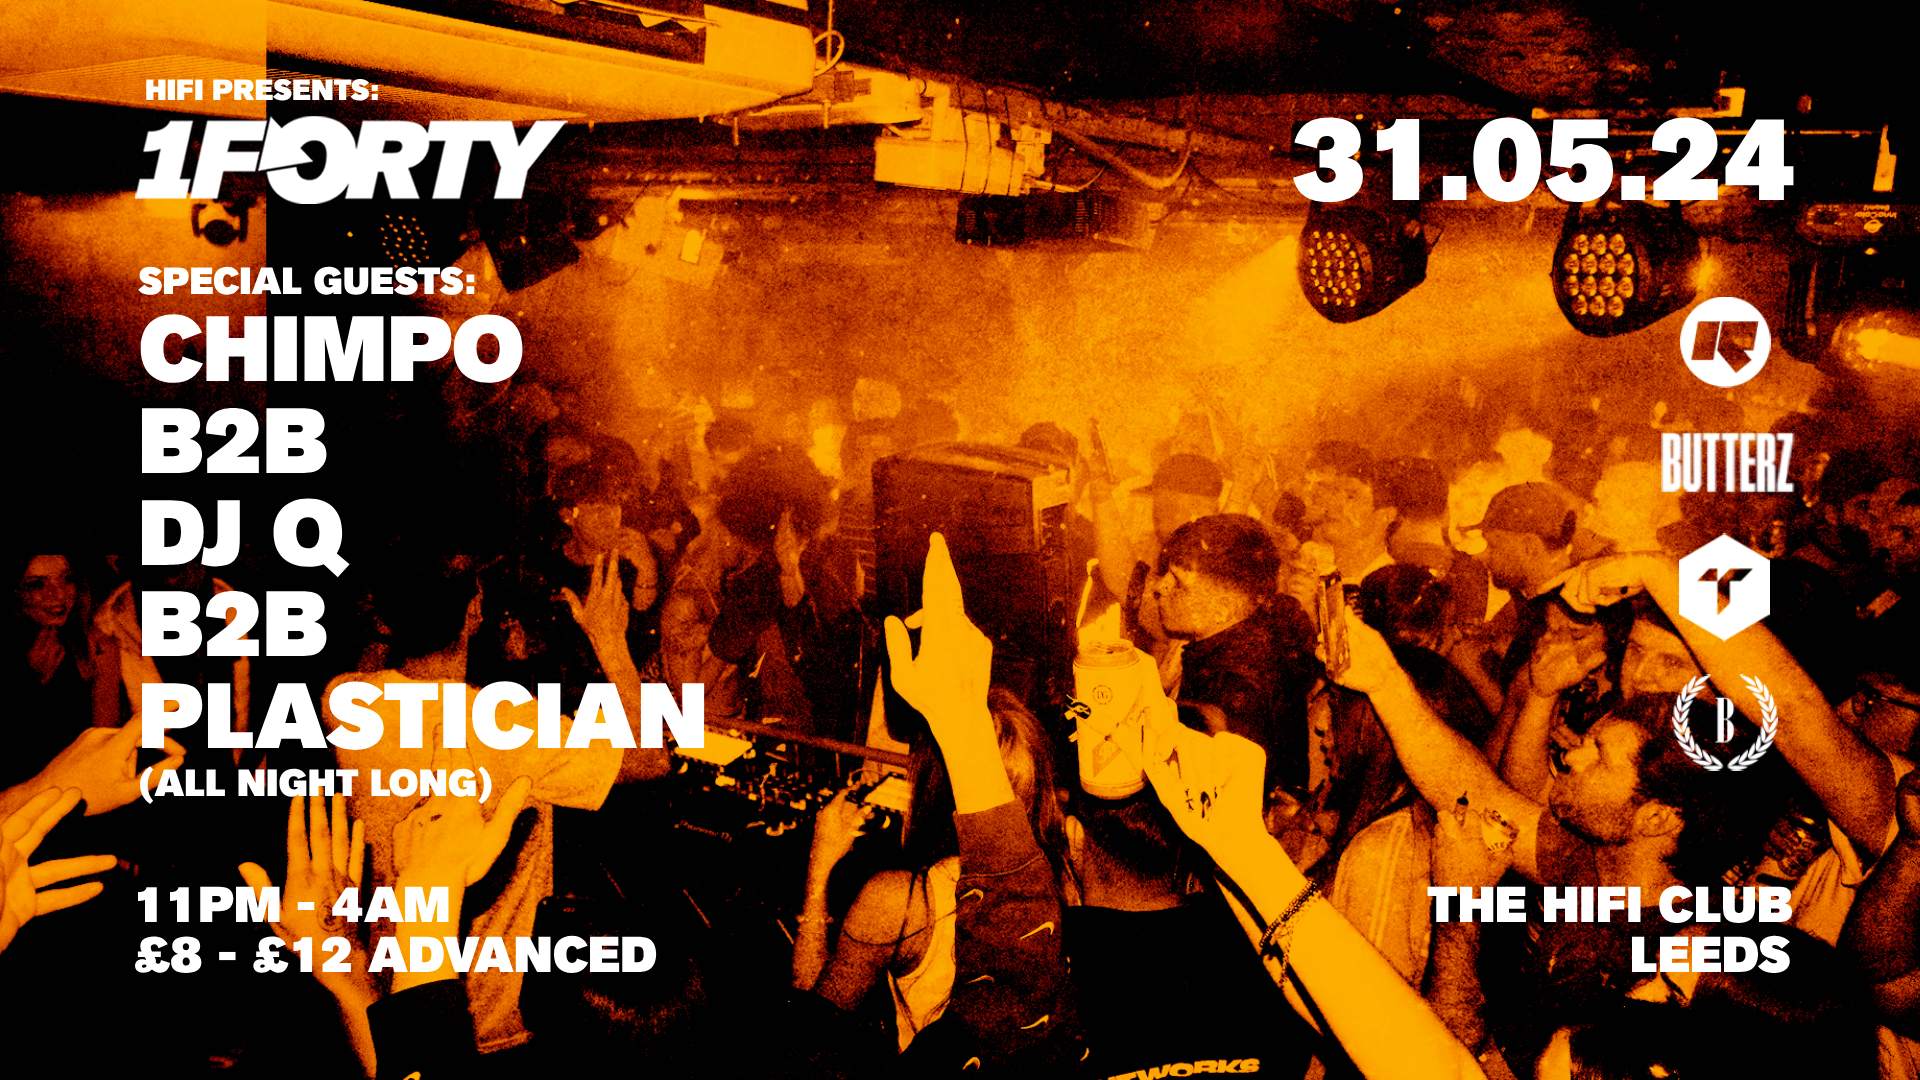 [CANCELLED] Hifi presents: 1FORTY with Chimpo B2B DJ Q B2B Plastician (All Night Long) - フライヤー表